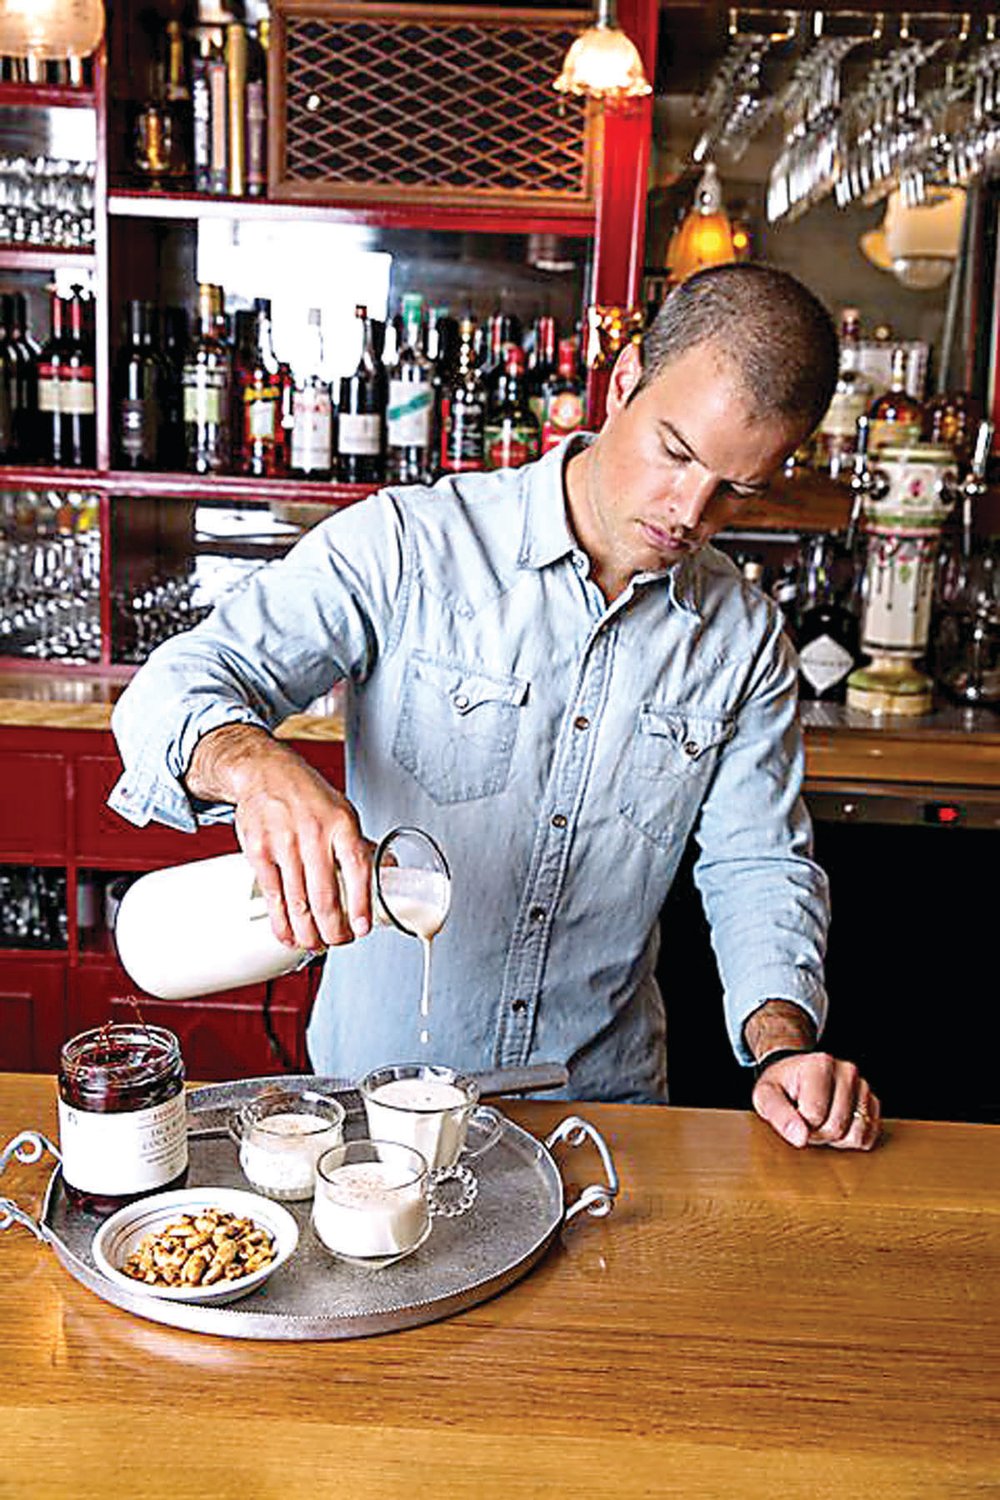 Brooks Reitz, founder of Jack Rudy Cocktail Co., pours his version of George Washington’s alcohol-laced eggnog. Photograph by popularmechanics.com